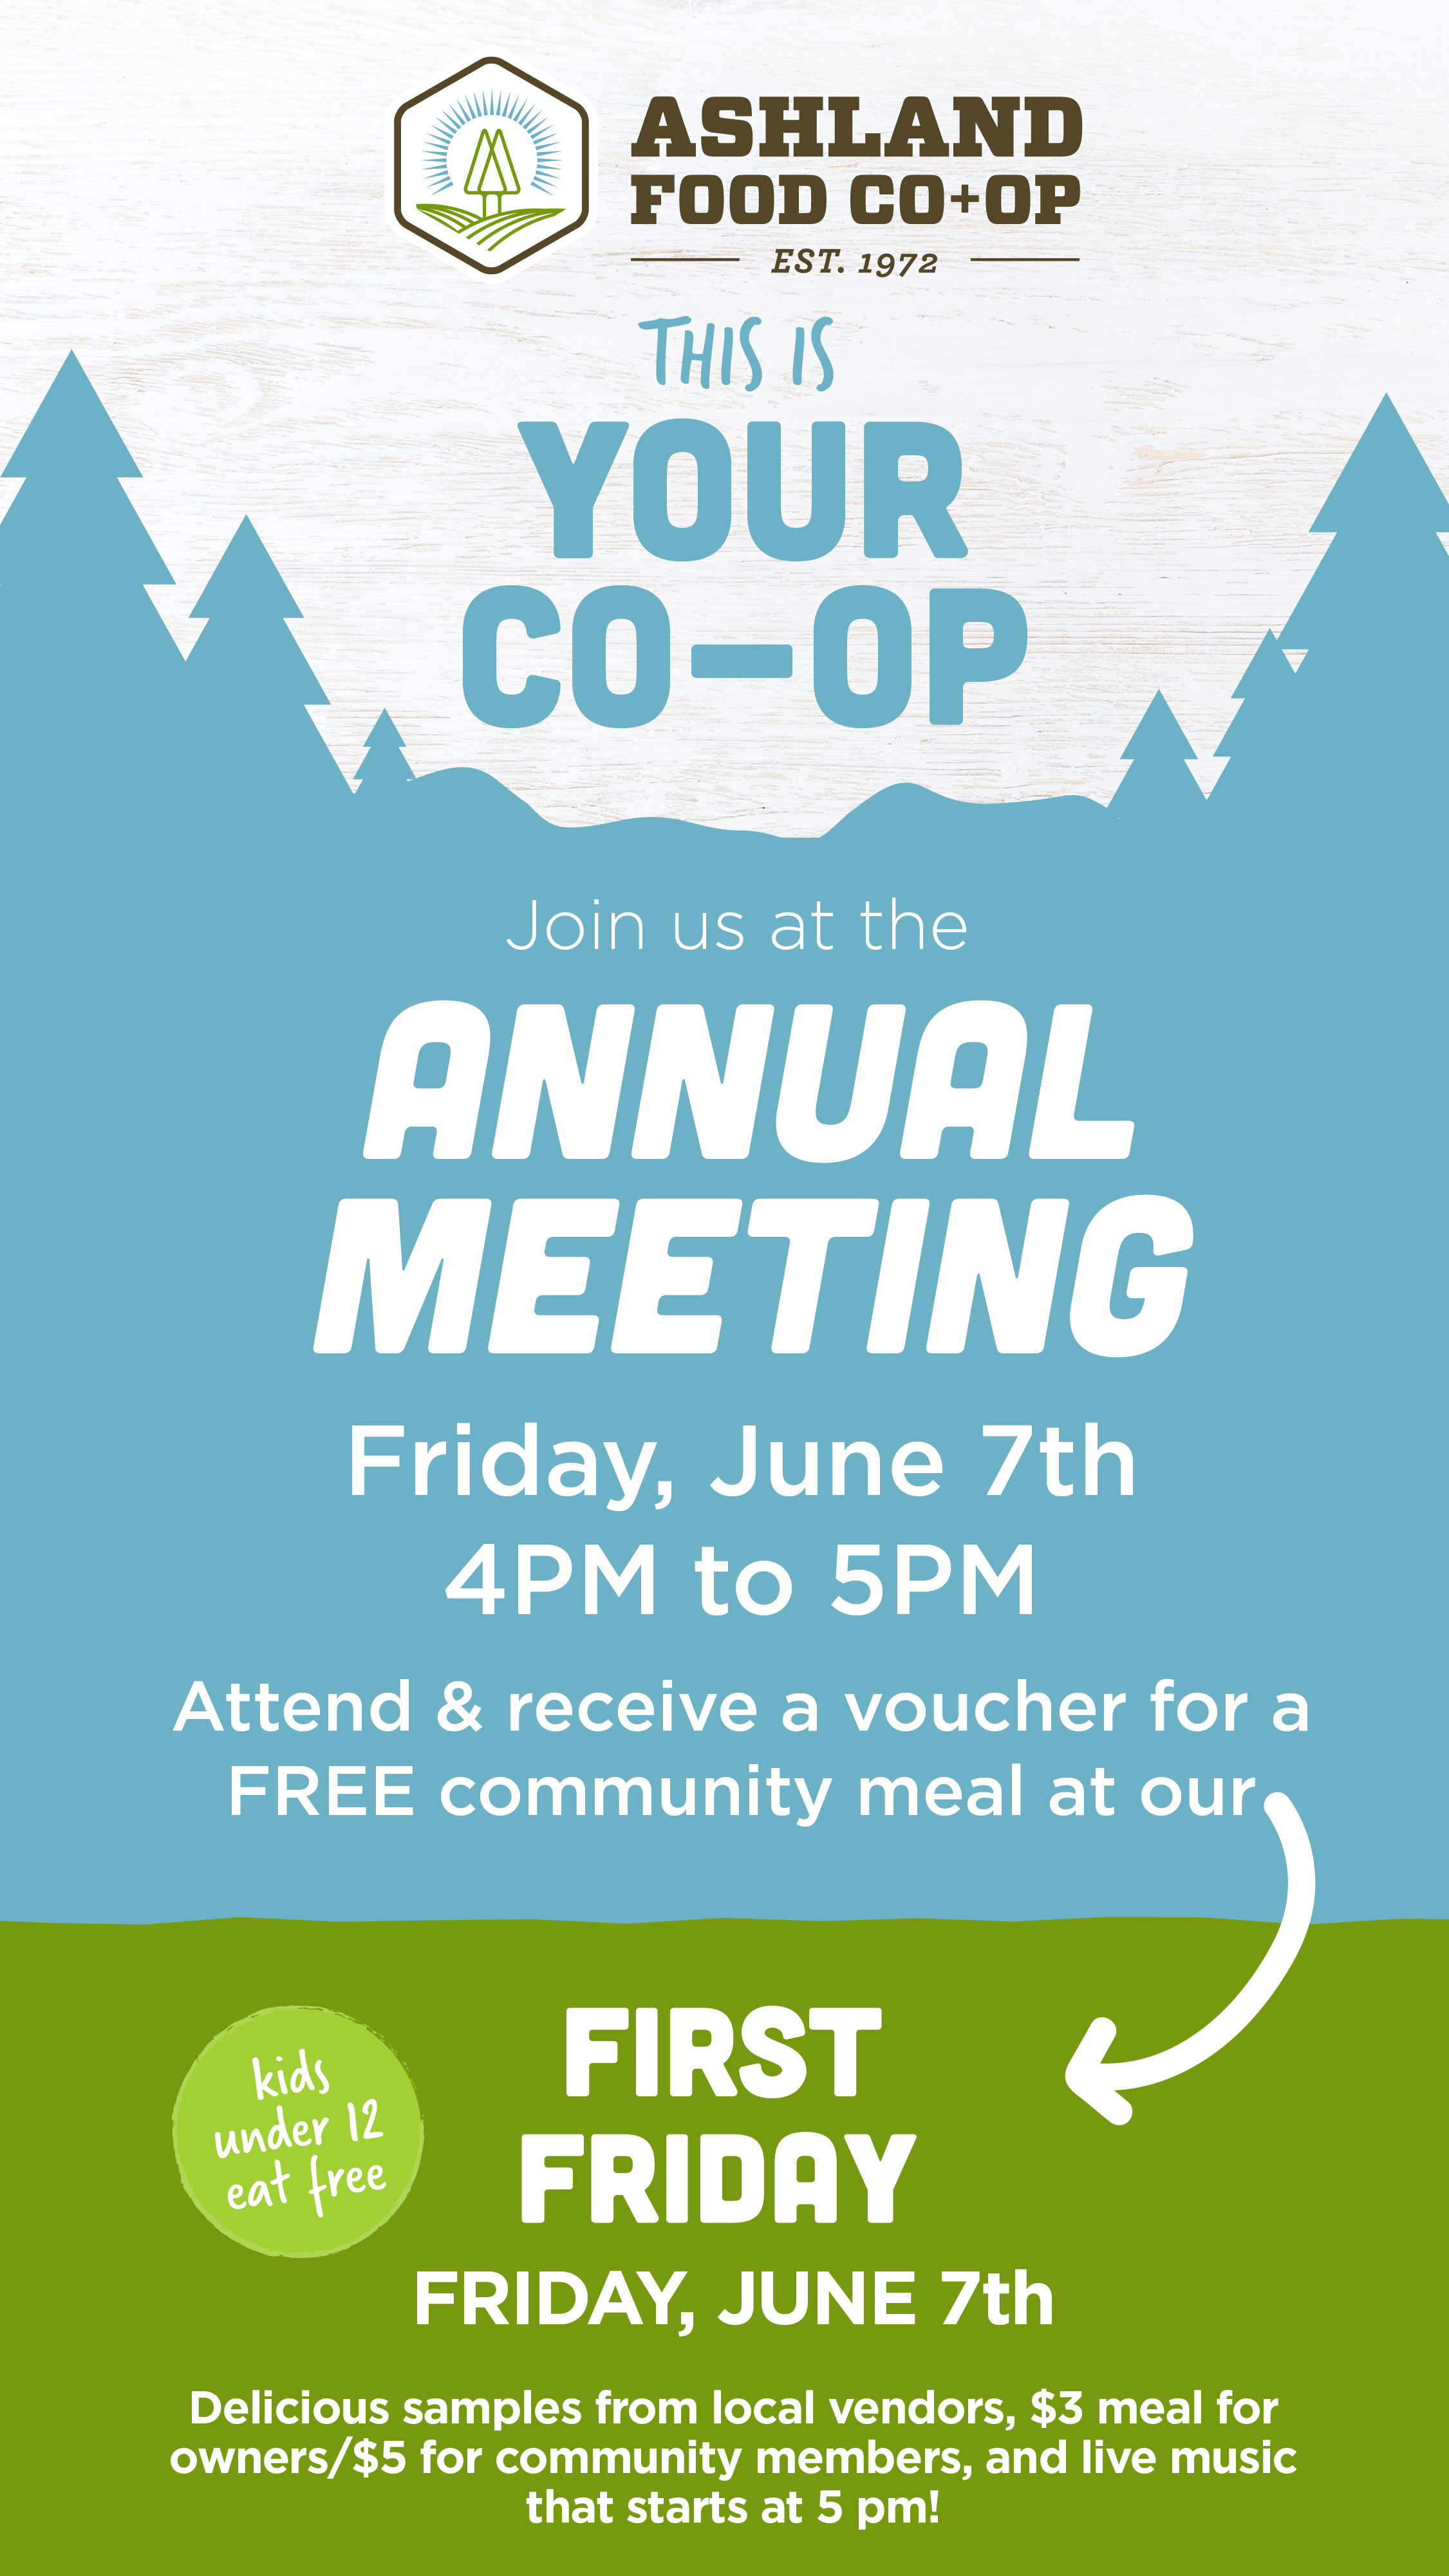 2019 Annual Meeting - 4-5pm at the Pioneer Conference Room